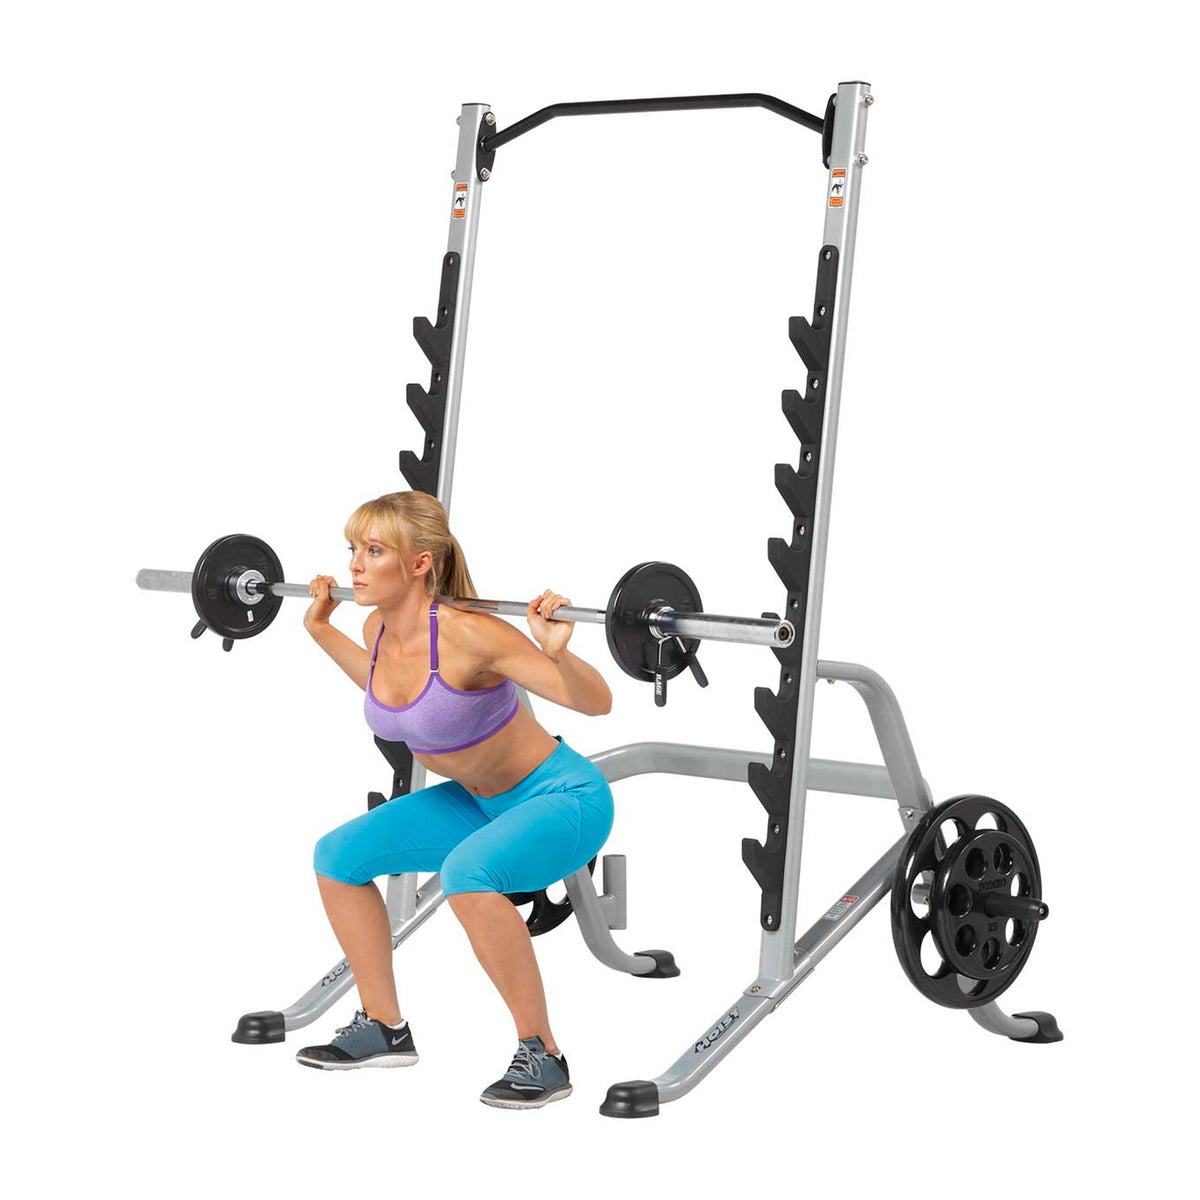 Hoist Fitness HF-5970 Multi-Purpose Squat Rack view in use | Fitness Experience